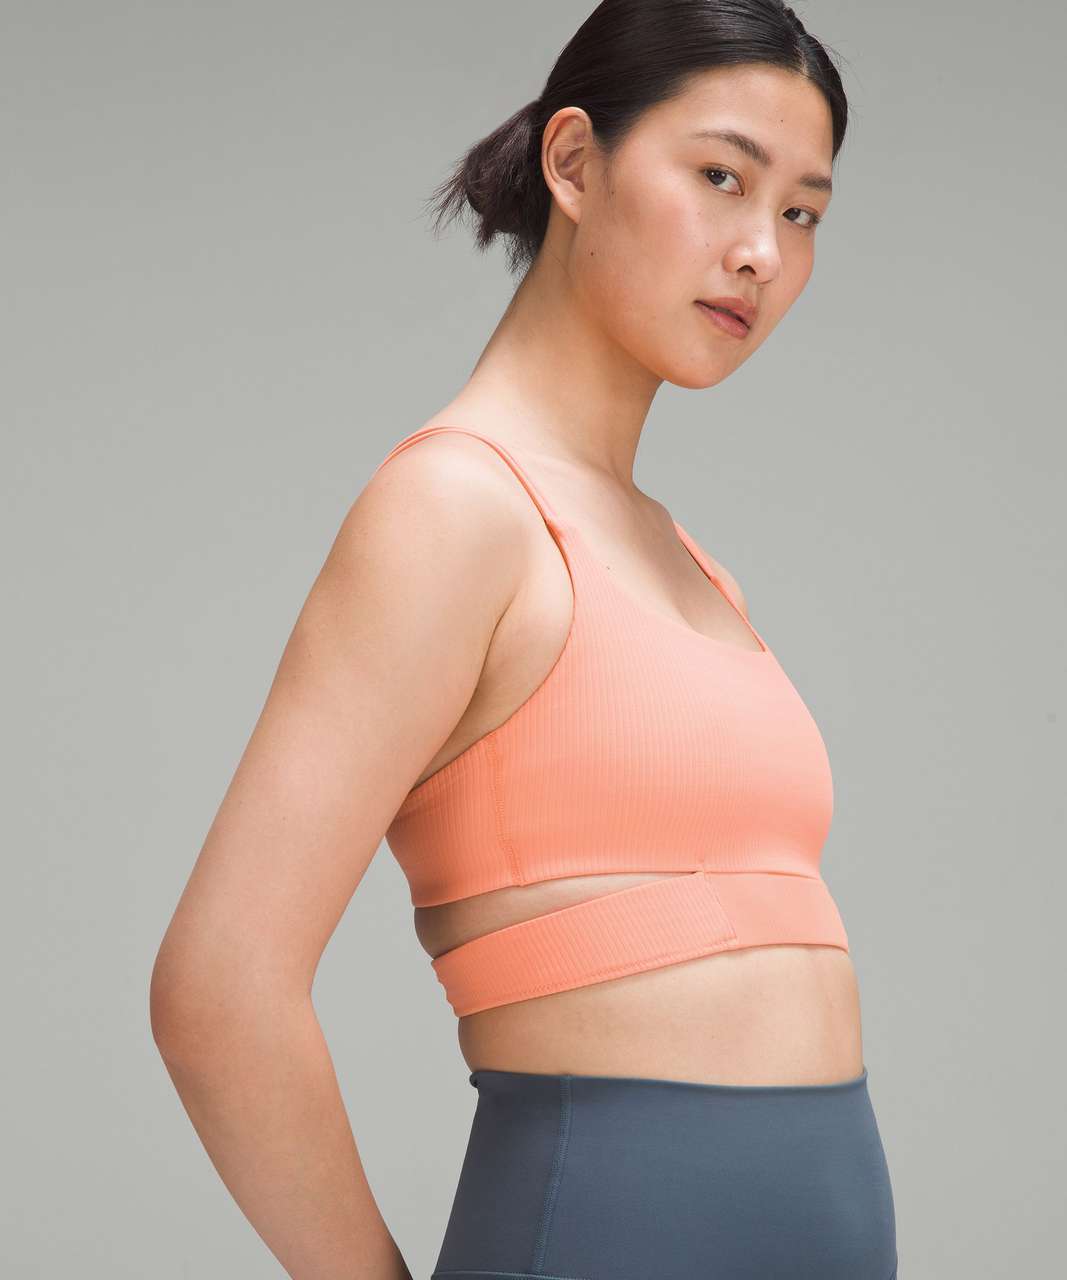 Lululemon Ribbed Nulu Strappy Yoga Bra *Light Support, A/B Cup - Sunny Coral